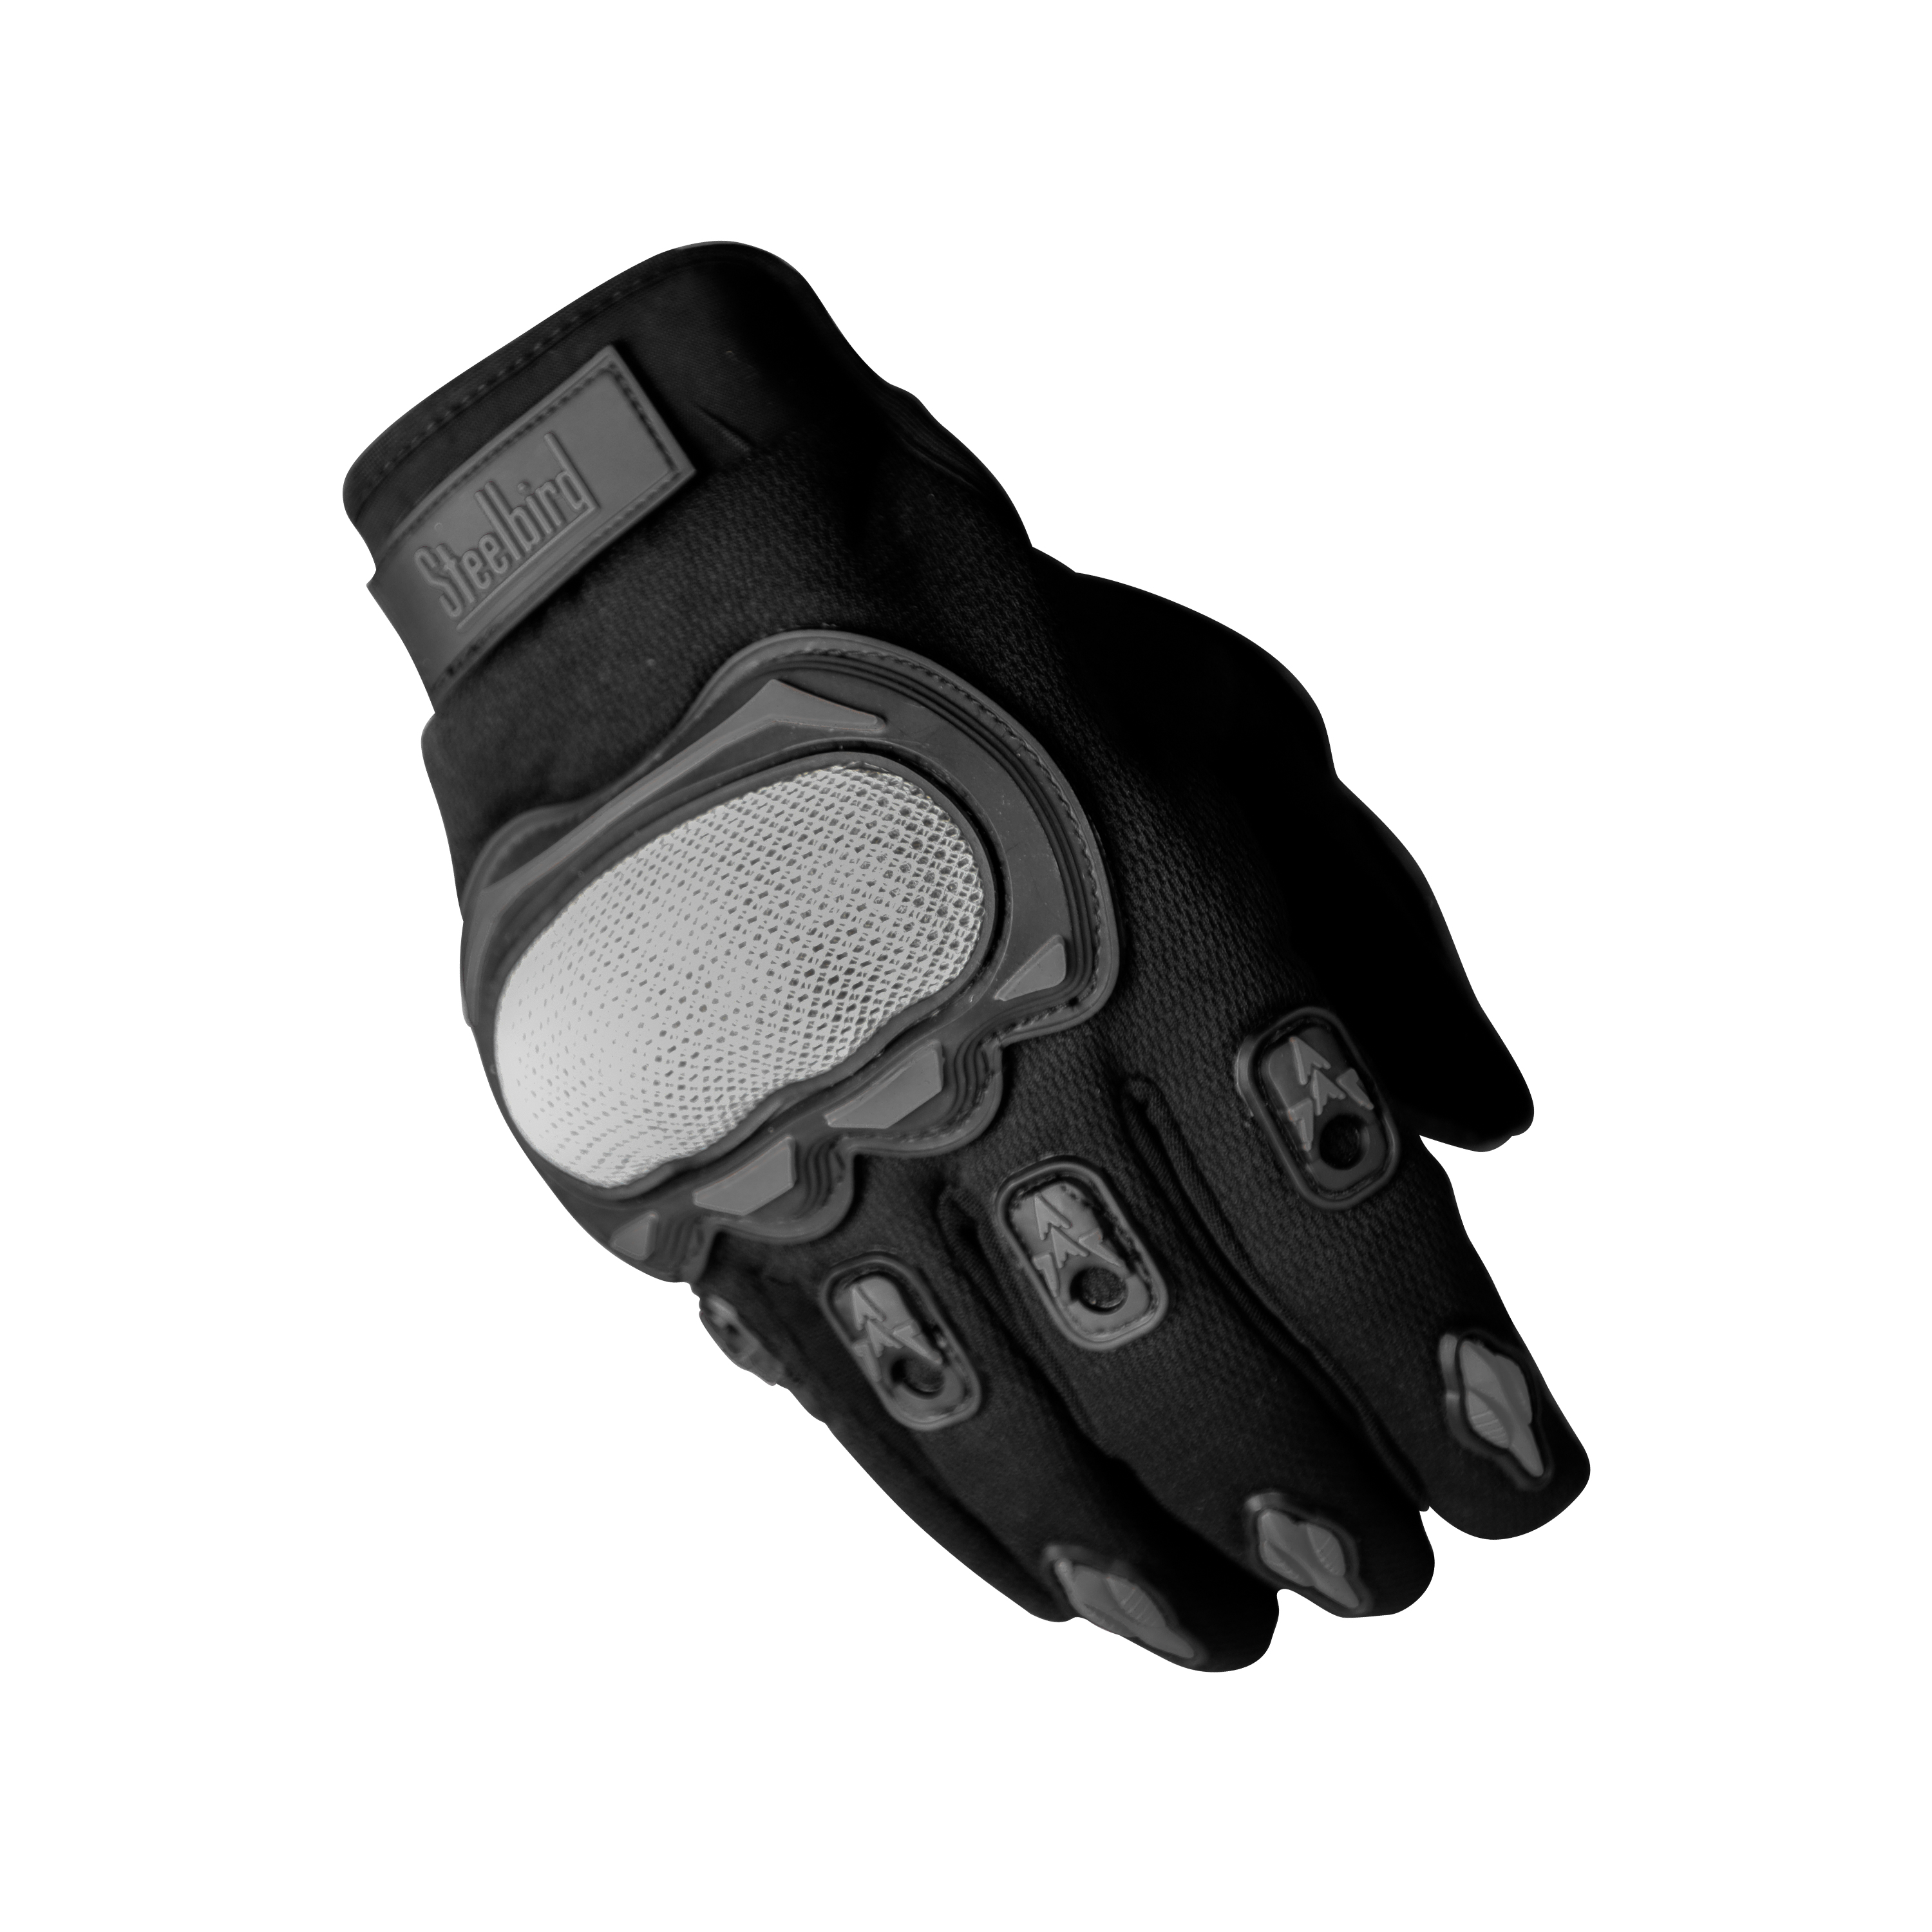 Steelbird Experience 1.0 Reflective Full Finger Bike Riding Gloves with Touch Screen Sensitivity at Thumb and Index Finger, Protective Off-Road Motorbike Racing (Black Grey)